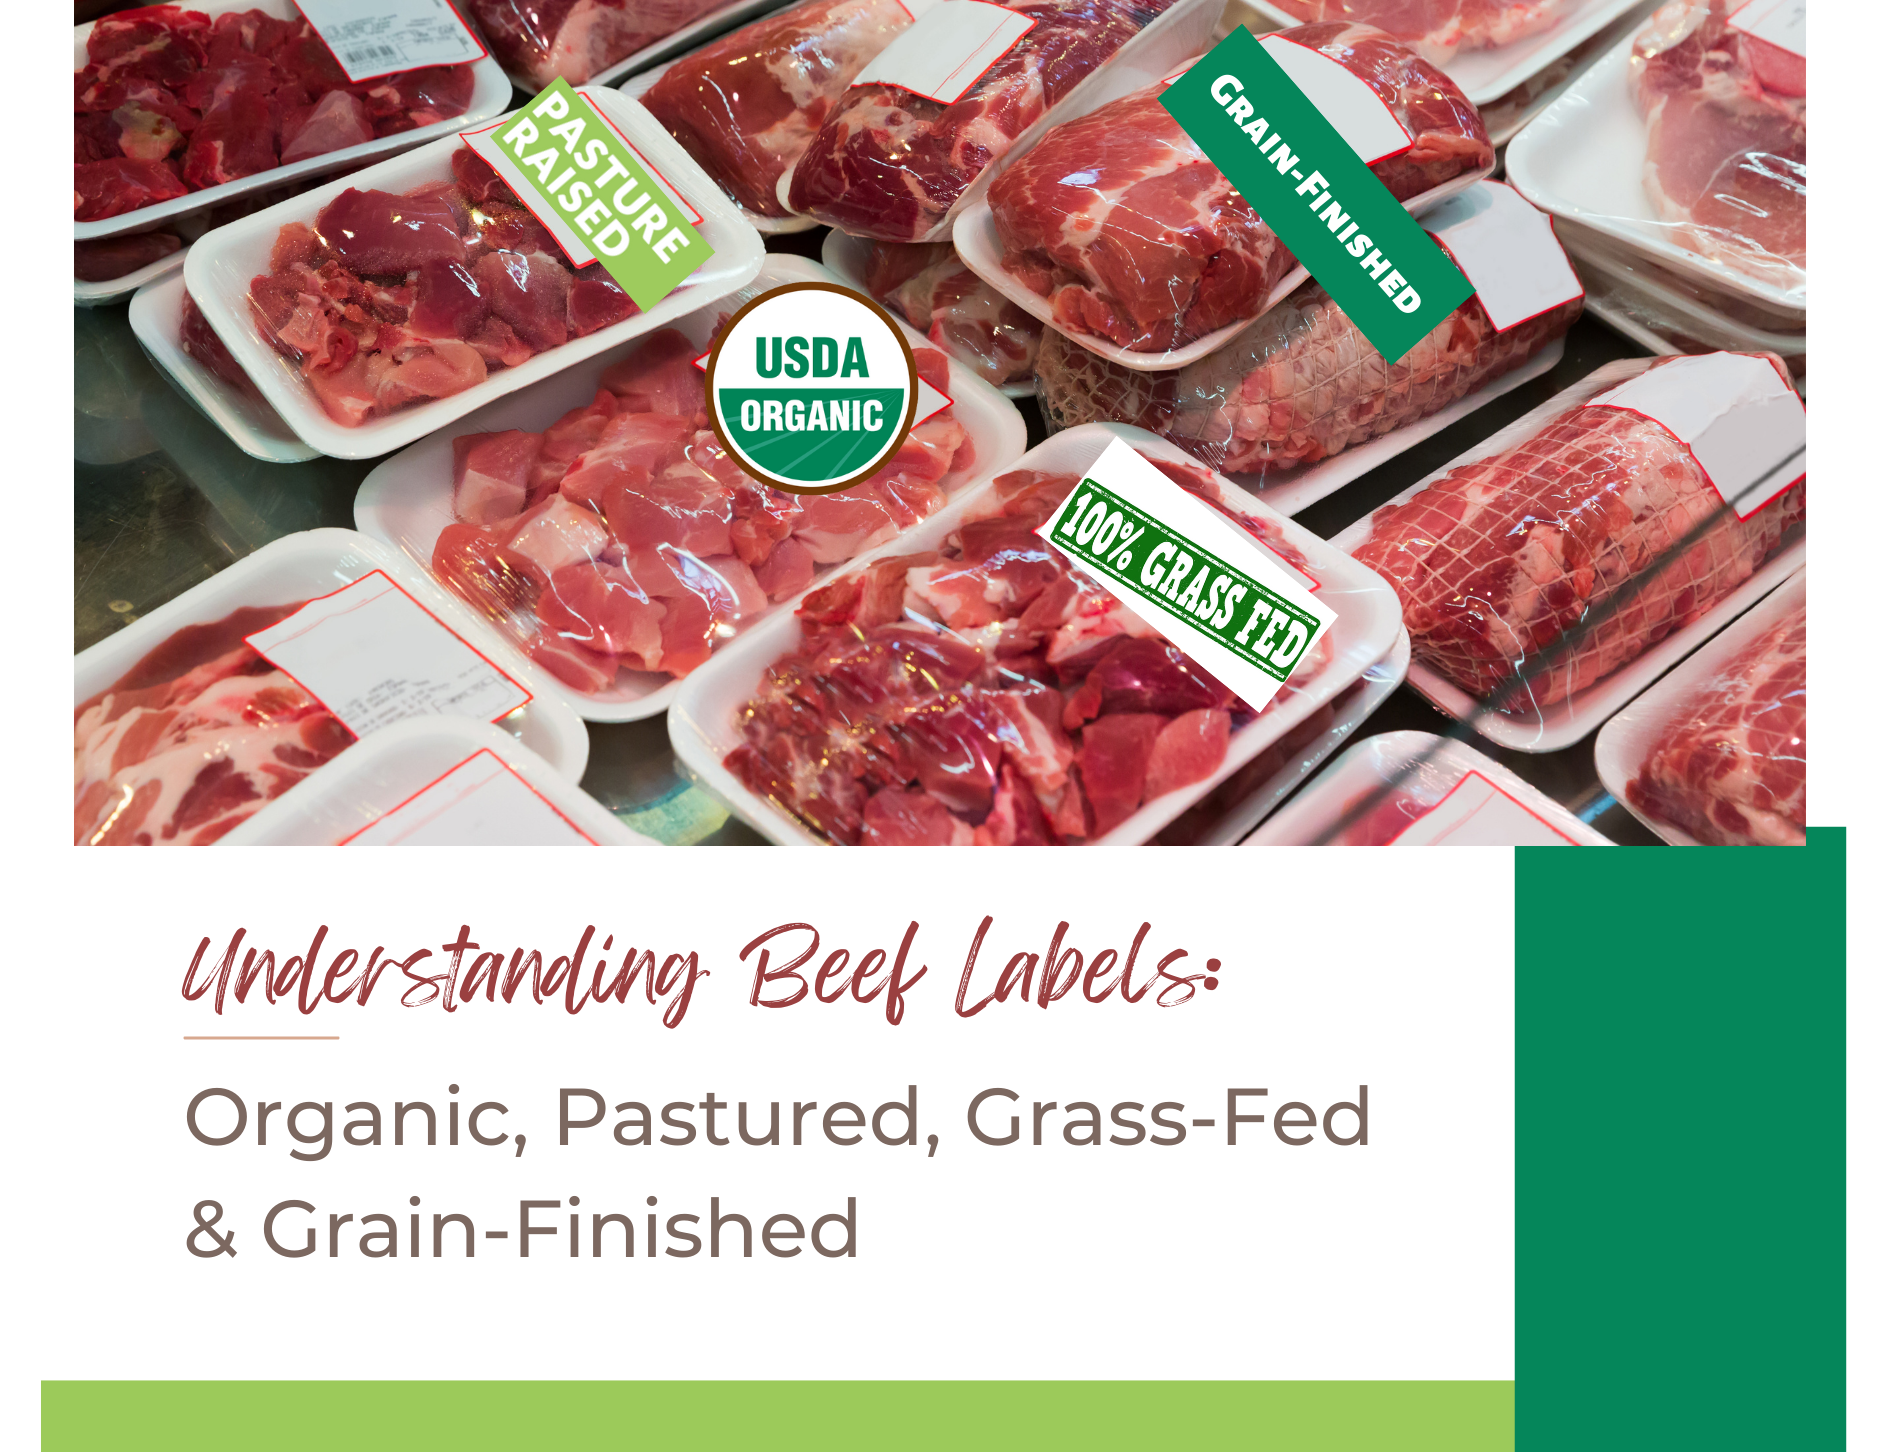 Understanding Beef Labels: Organic, Pastured, Grass-Fed & Grain-Finished